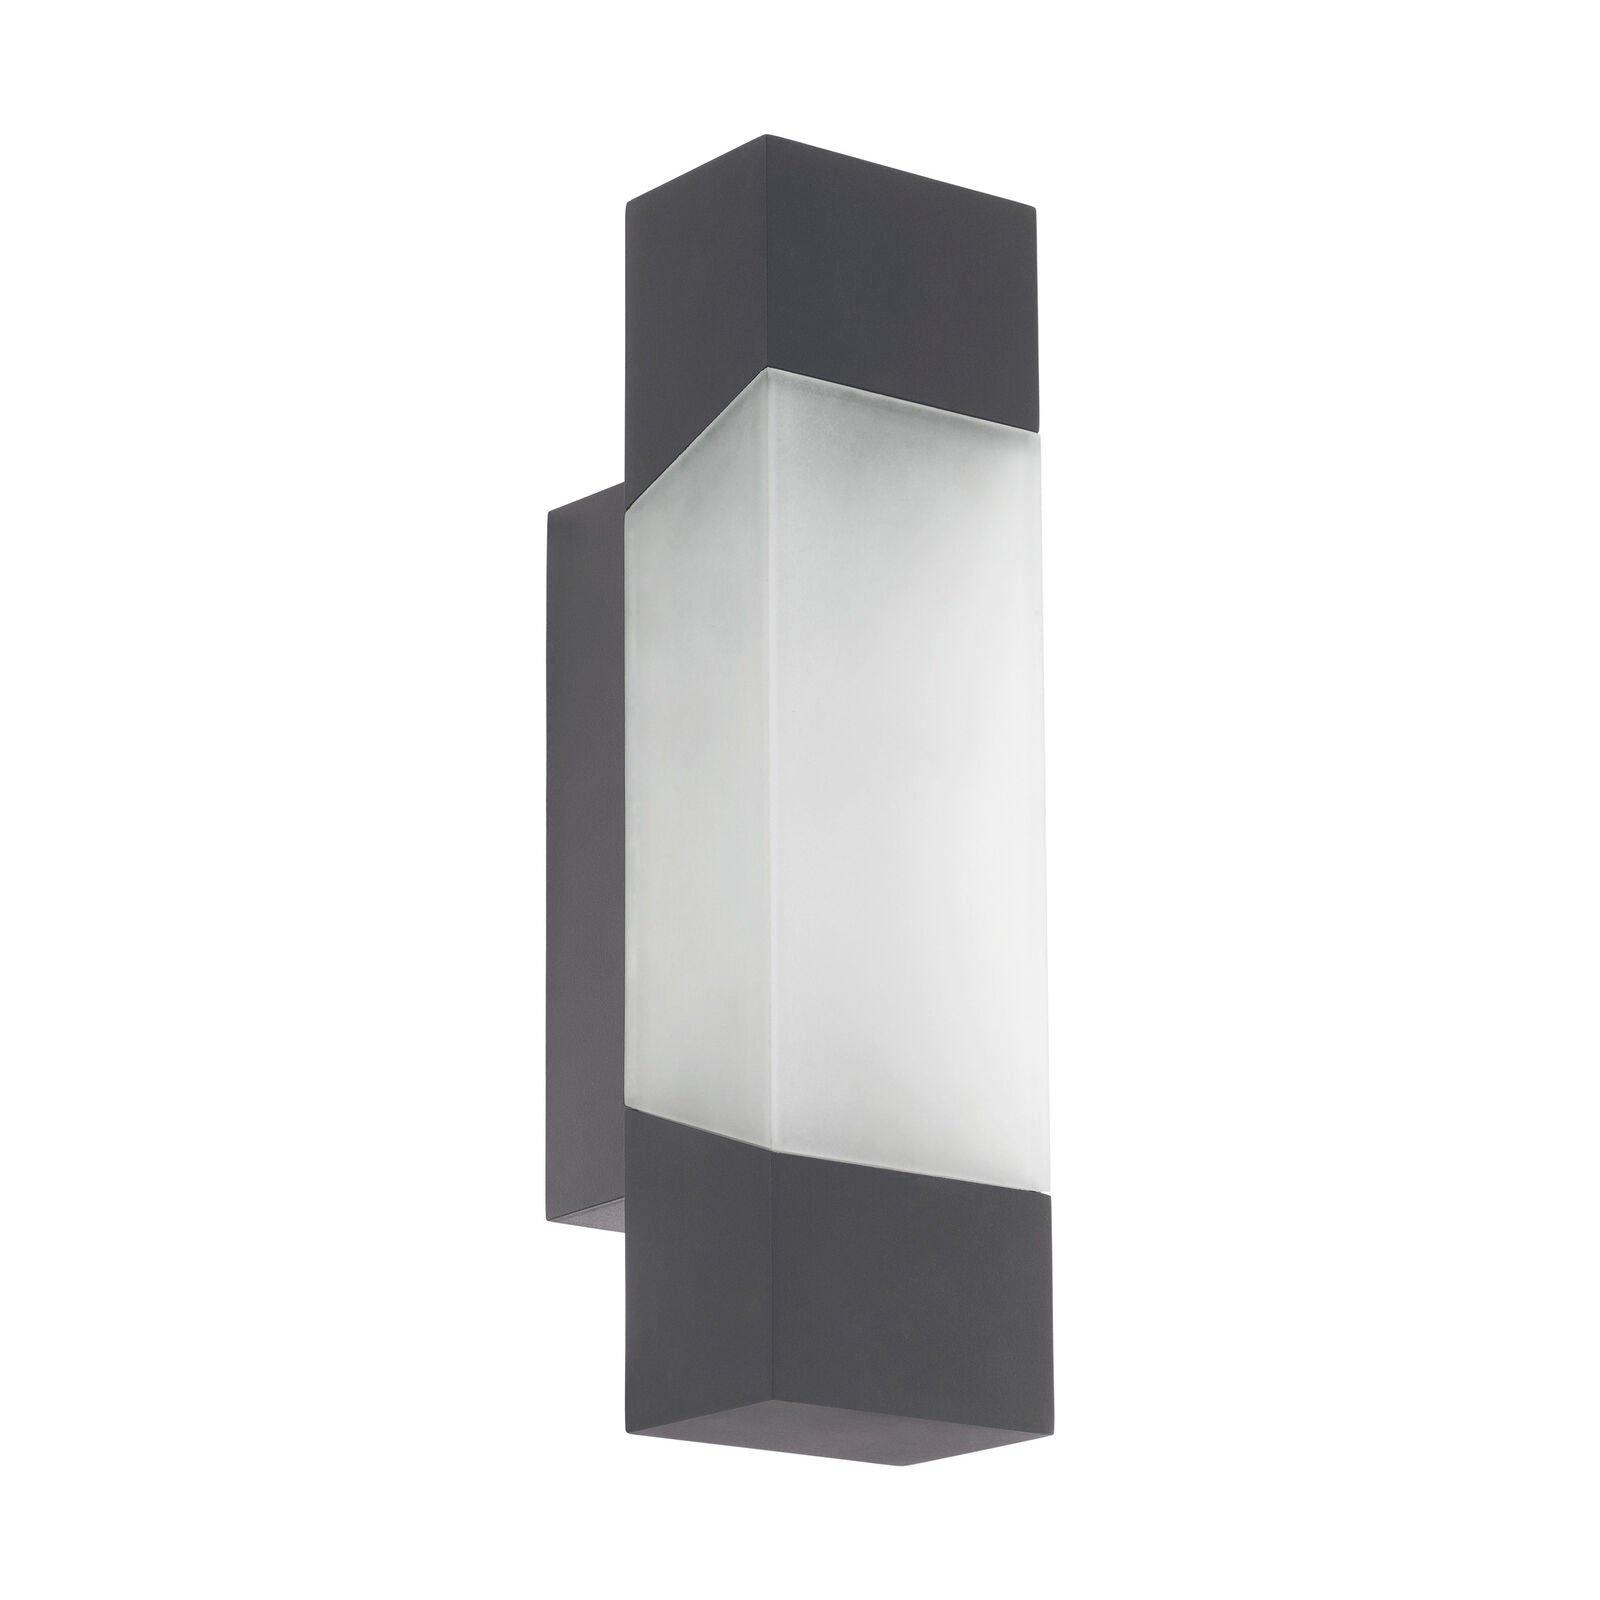 IP44 Outdoor Wall Light Anthracite Porch Accent Lamp 4.8W Built in LED